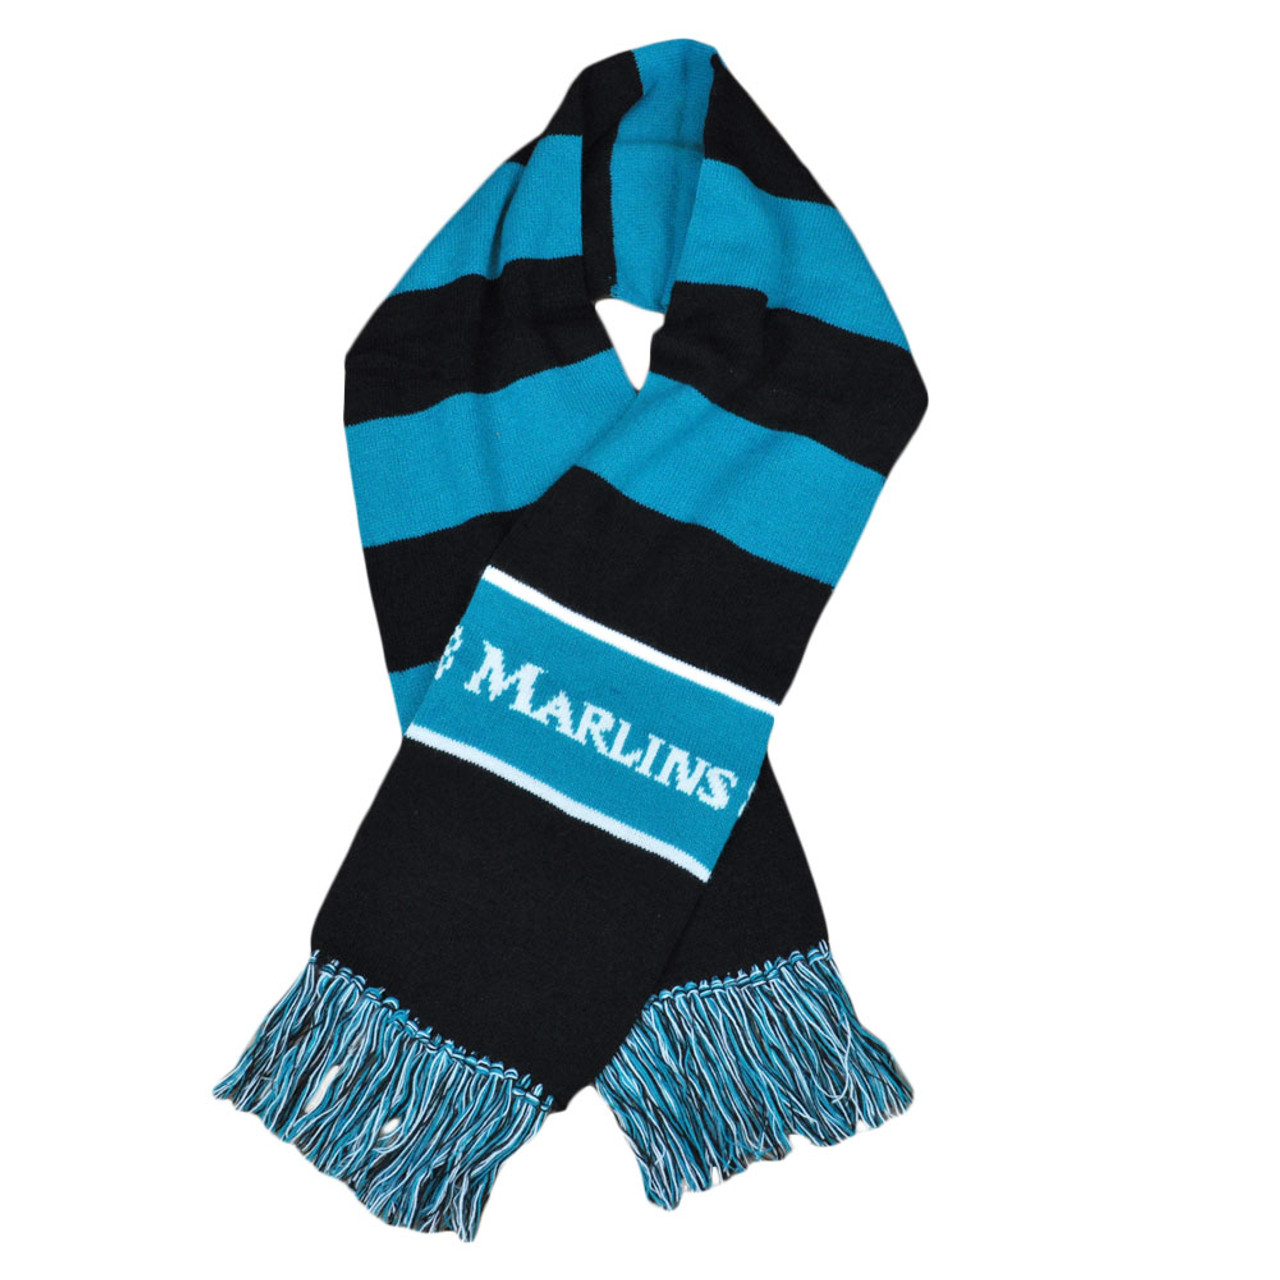 MLB Florida Miami Marlins Striped Knitted Team Scarf Winter